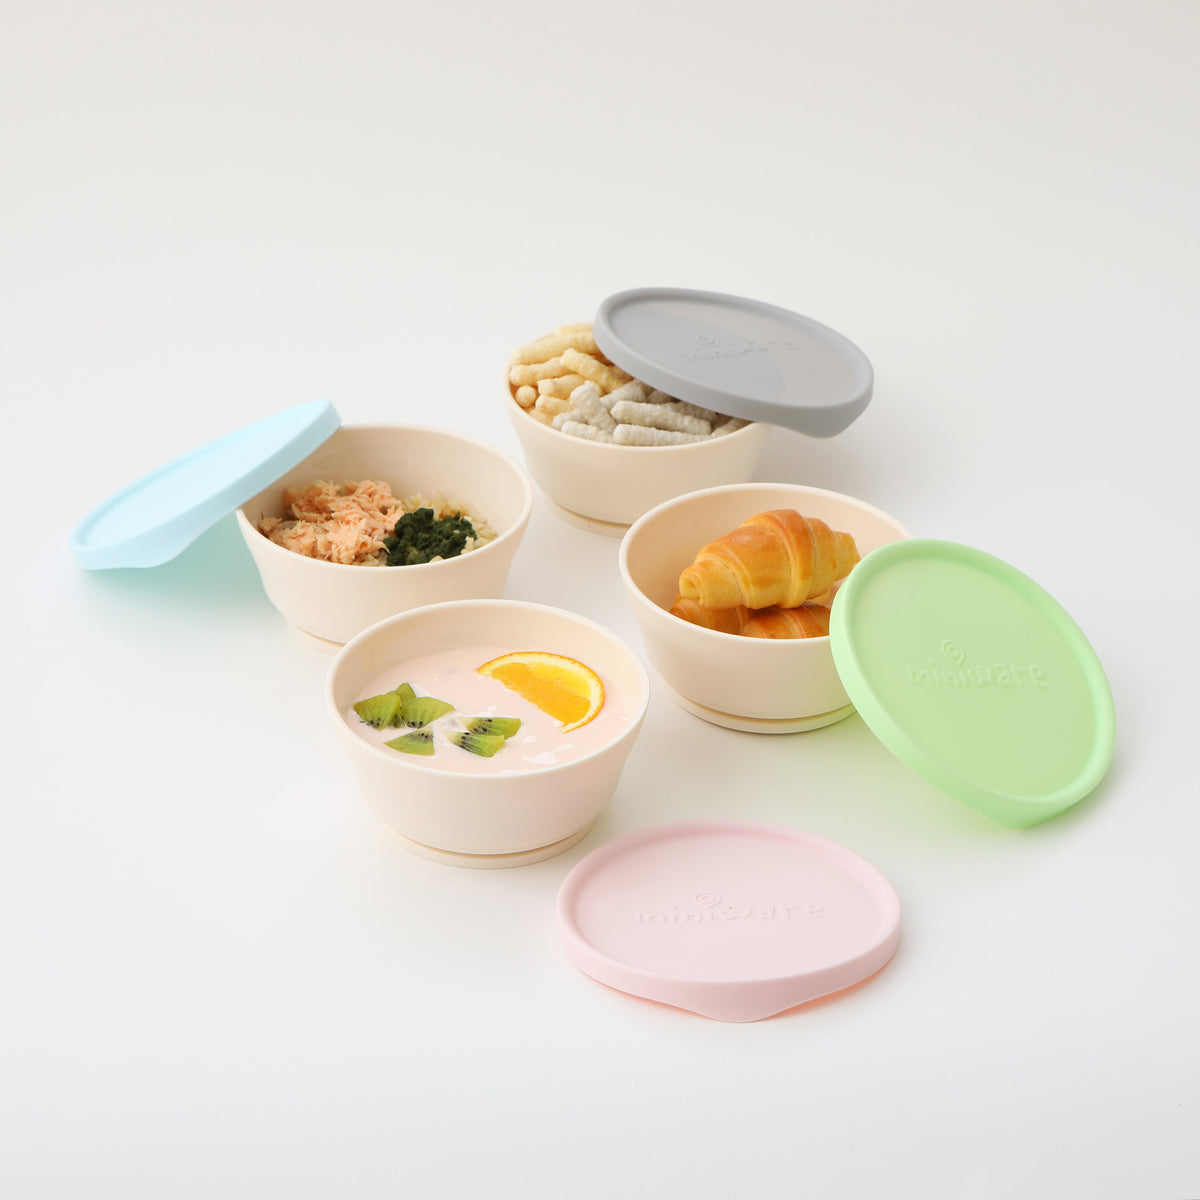 miniware-first-bite-set-pla-cereal-suction-bowl-vanilla-+-silicone-spoon-and-cover-in-cotton-grey- (16)